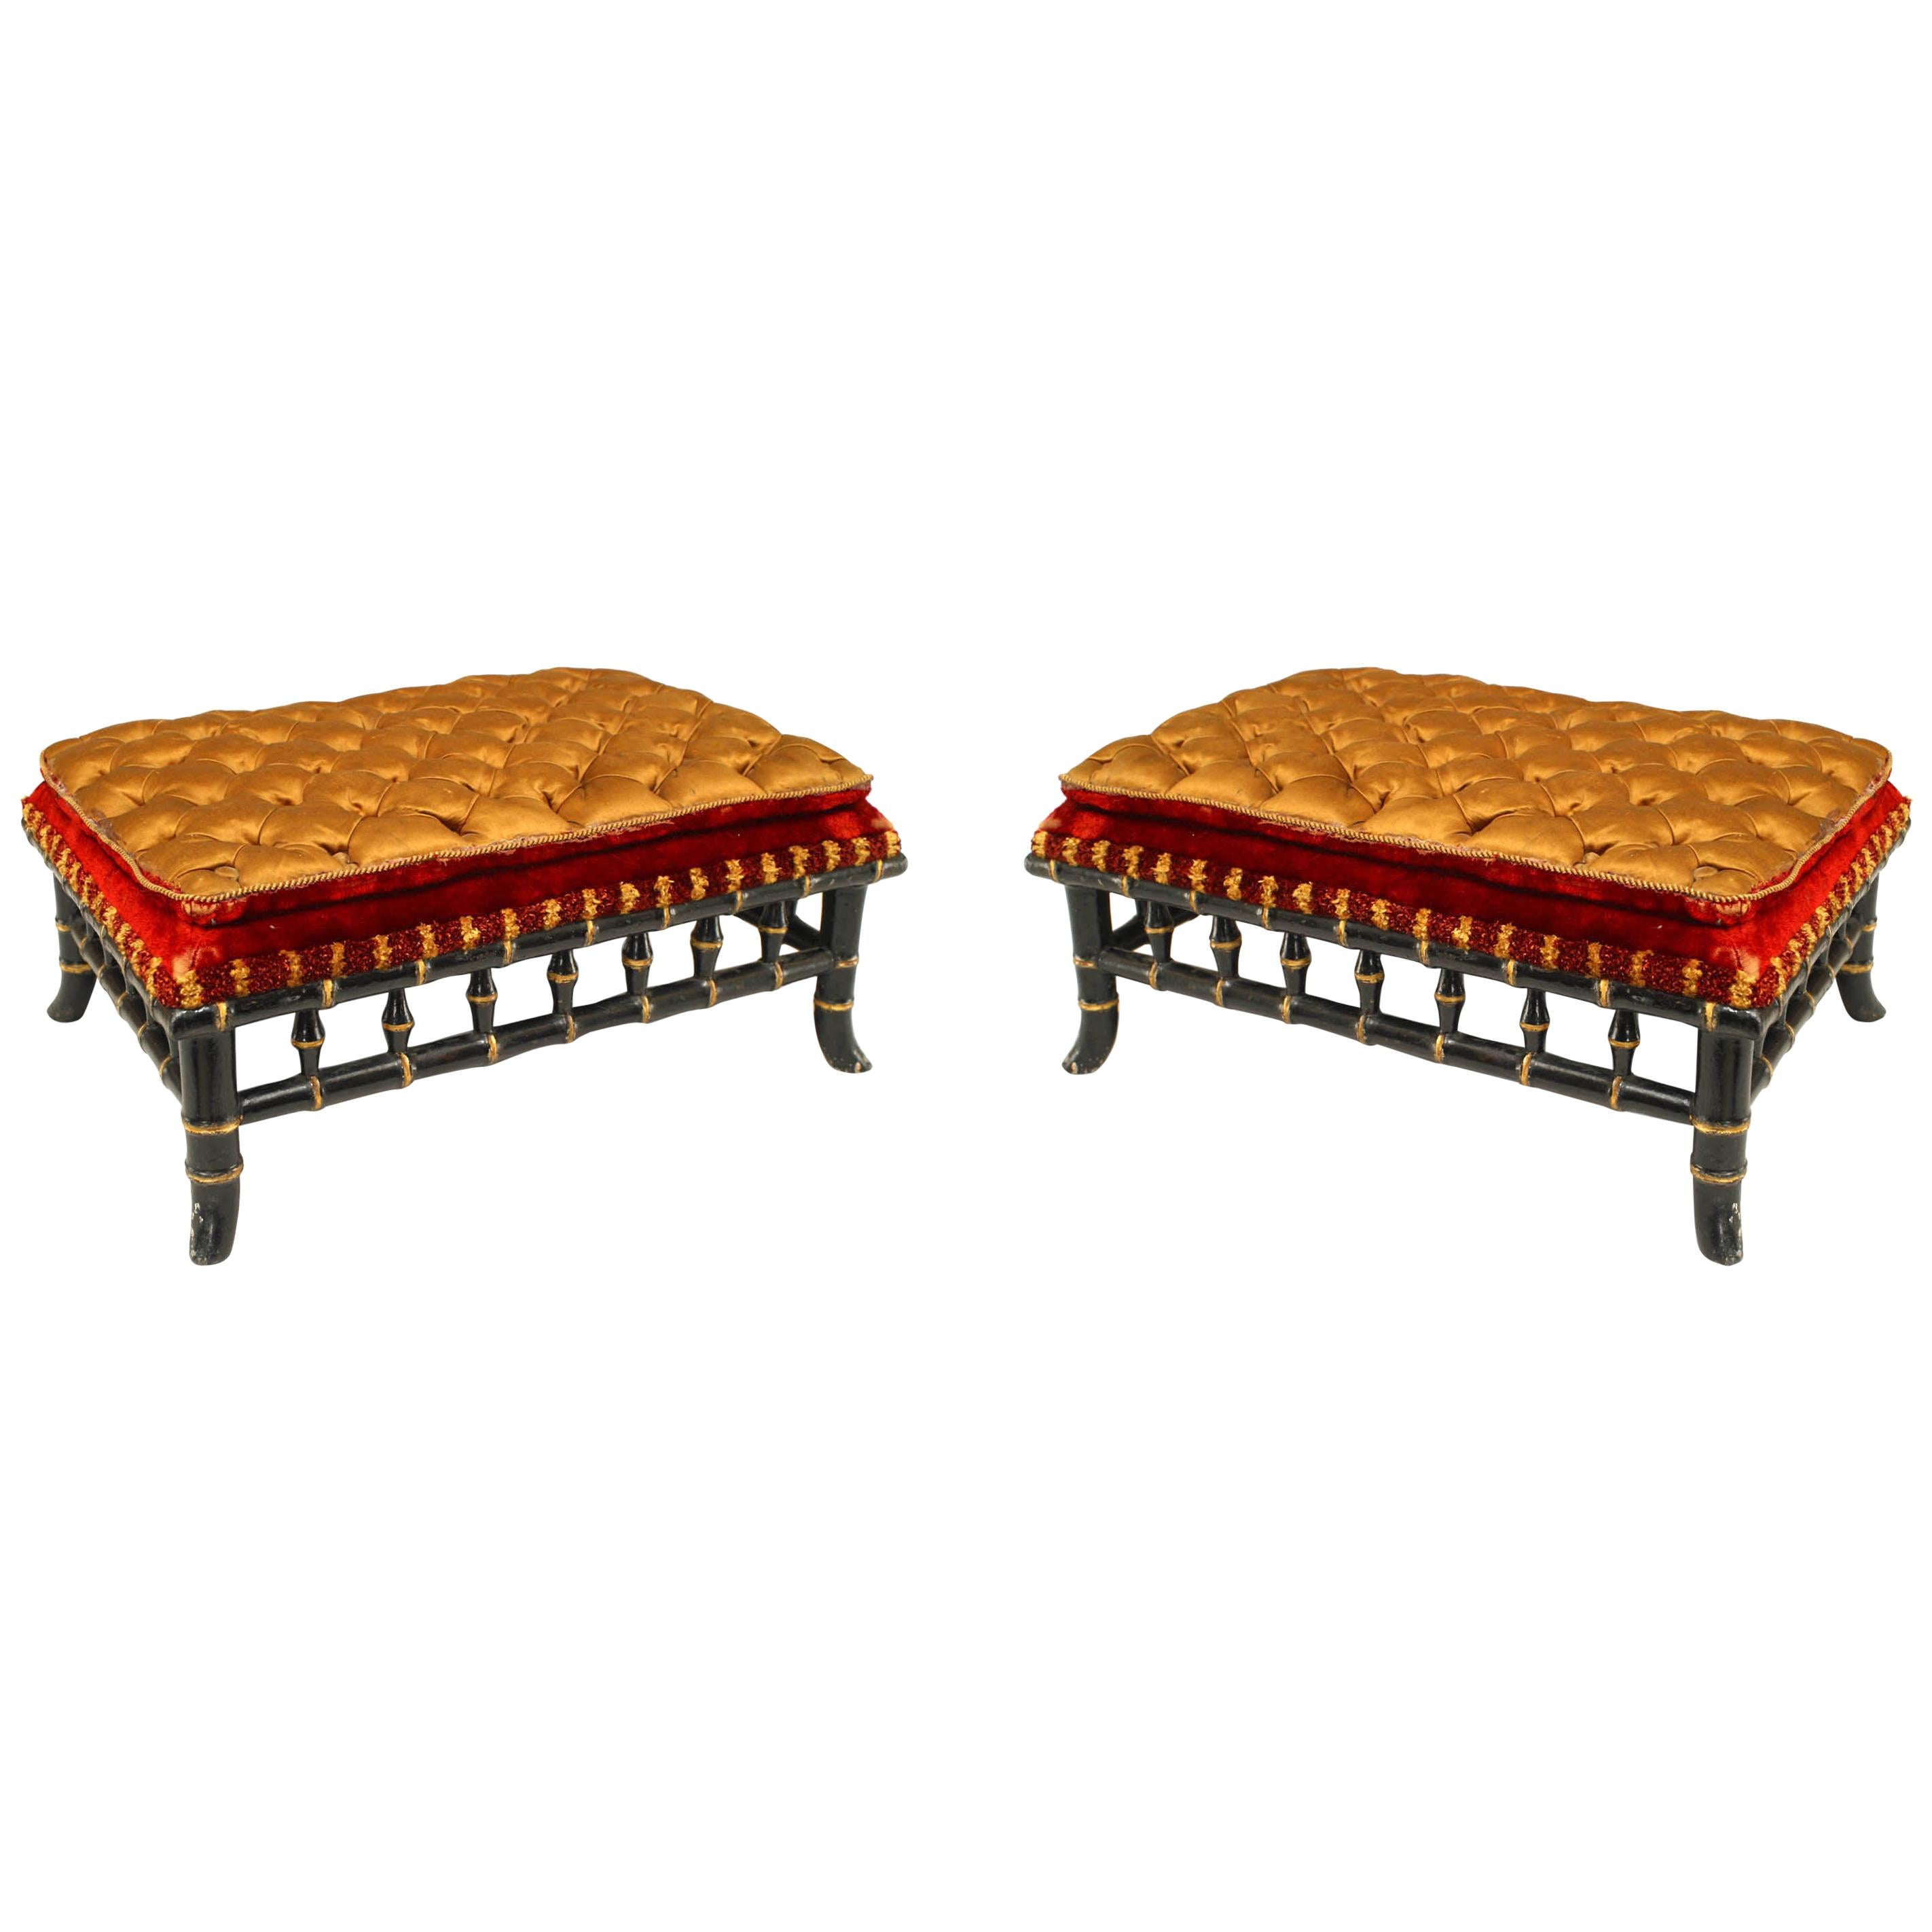 Pair of French Victorian Gold and Red Foot Stools